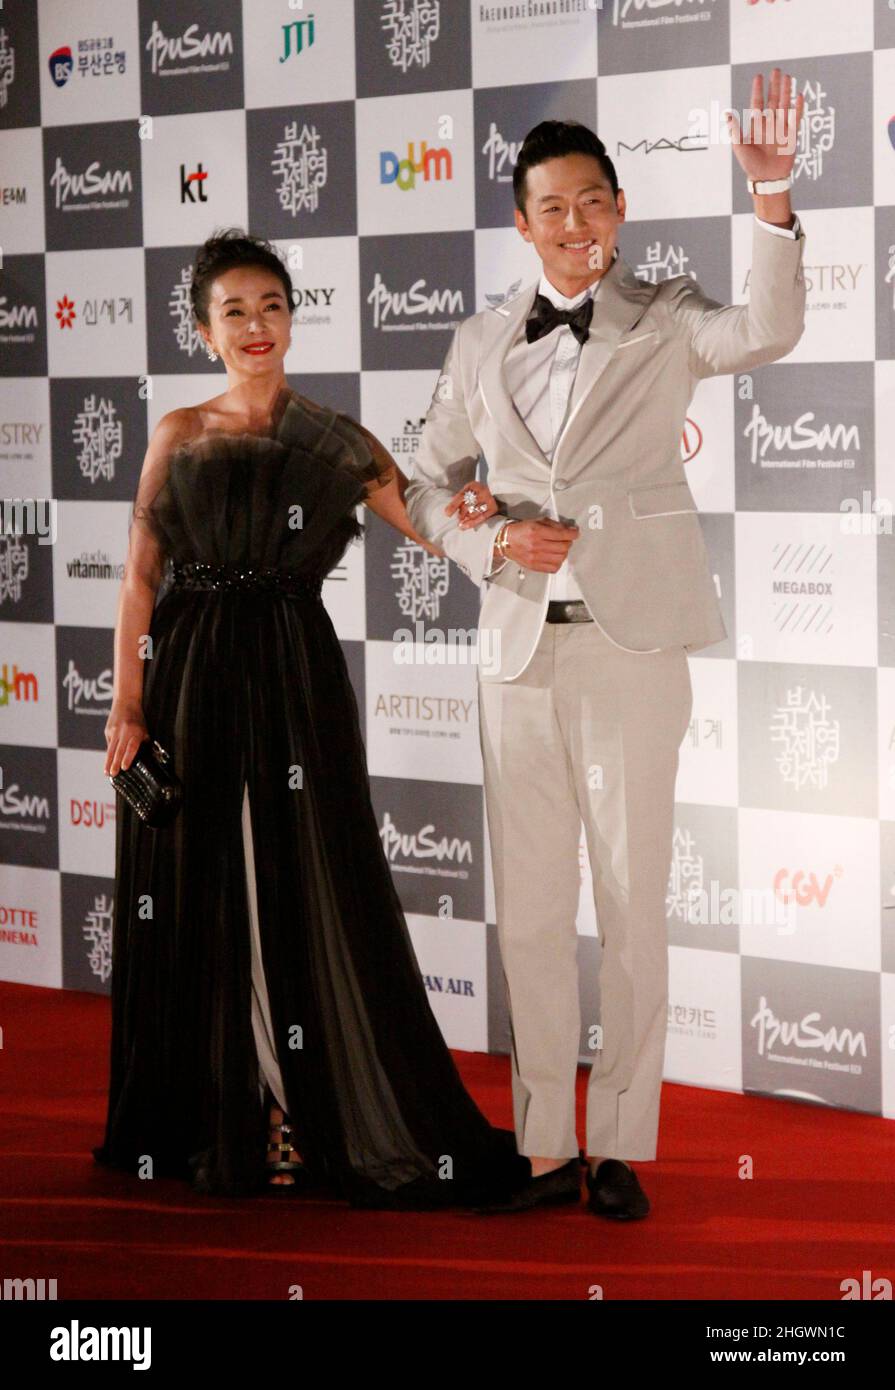 October 4, 2012 - Busan, South Korea : Actress Cho Min Soo and Actor lee Jung Jin pose for photo call during the 17th Busan International Film Festival Opening red carpet event at the Busan Cinema Center. Along with the now inevitable galaxy of stars promoting blockbusters from across Asia, this year's Busan International Film Festival will screen a North Korean film for the first time in almost a decade as well as six classic Afghan movies that were hidden in a wall to save them from the Taliban. Stock Photo